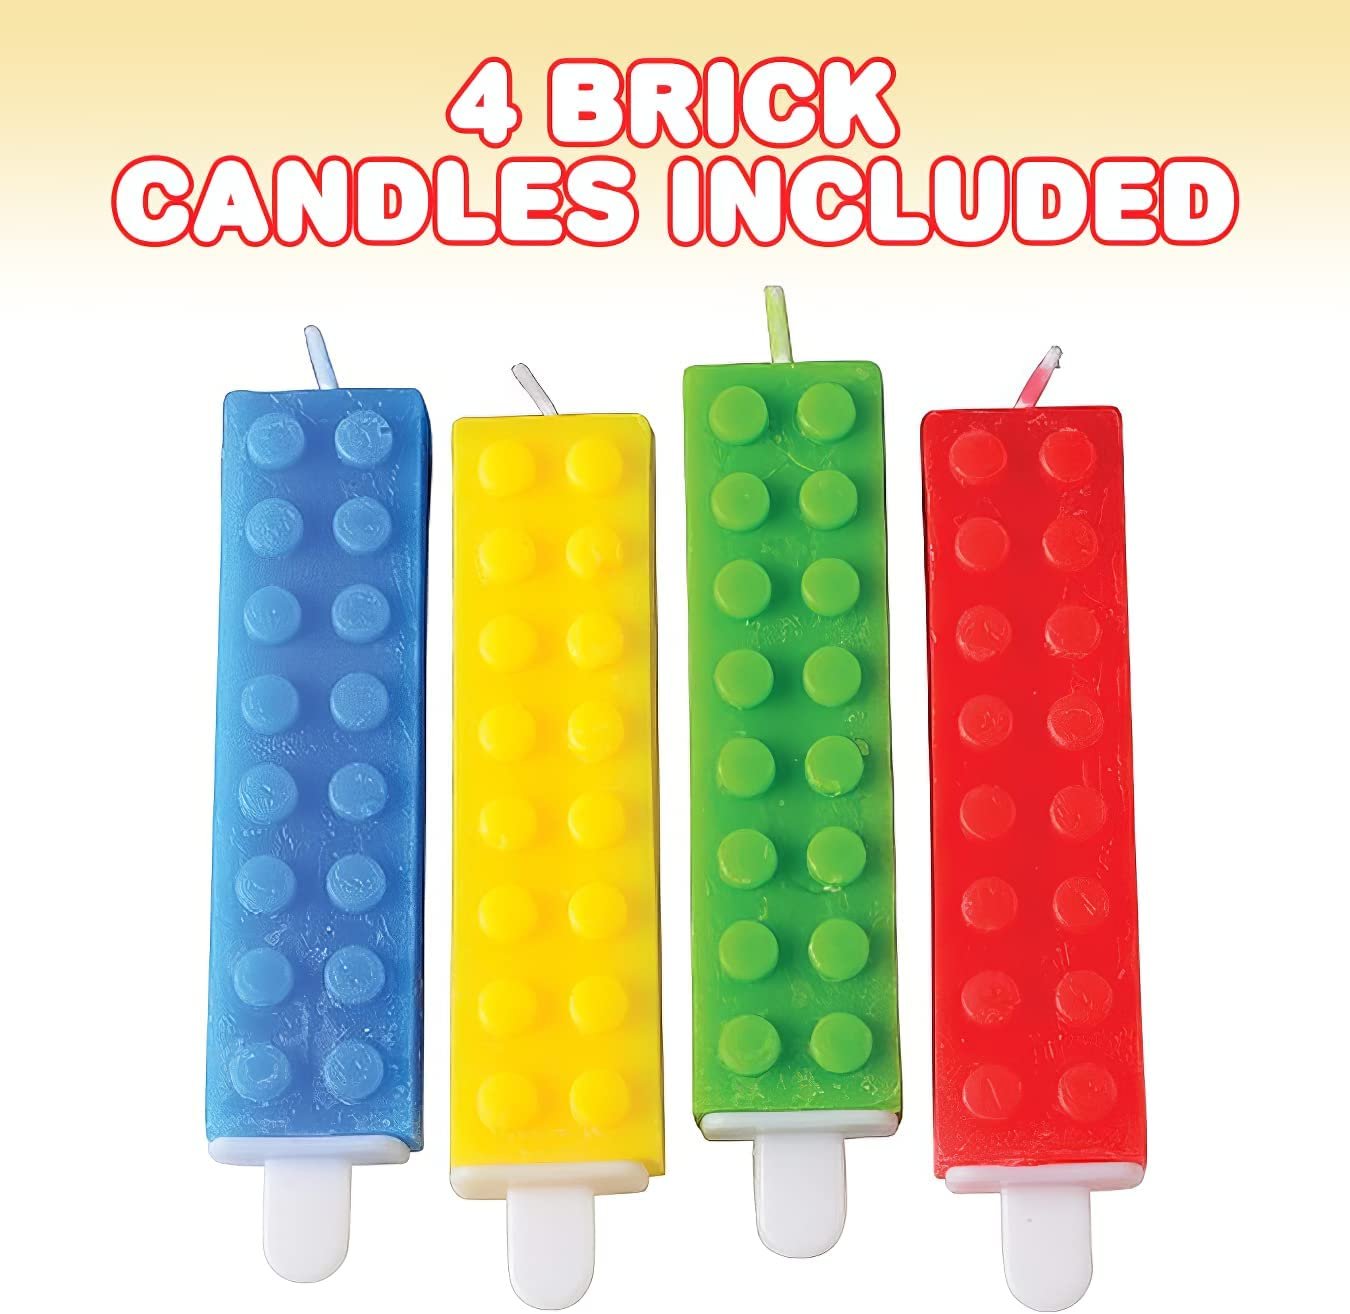 Brick Candles, Building Block Themed Birthday Cake Candles - Pack of 4 - Red, Yellow, Green, and Blue Brick Party Candles, Colorful Building Block Birthday Party Supplies and Decoration